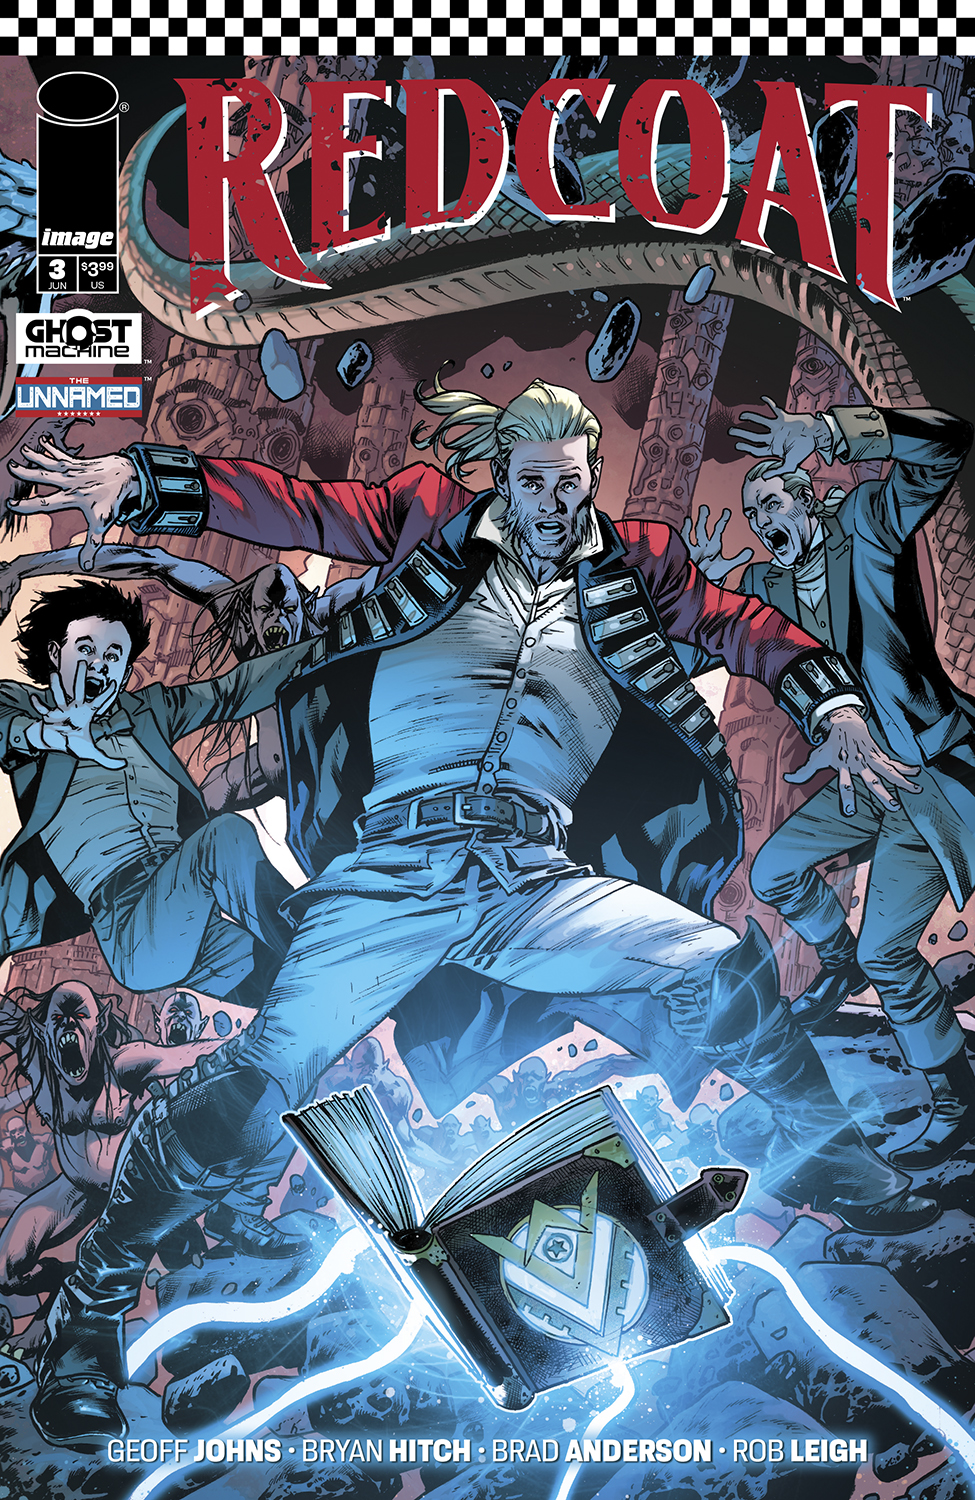 Redcoat #3 Cover A Bryan Hitch & Brad Anderson